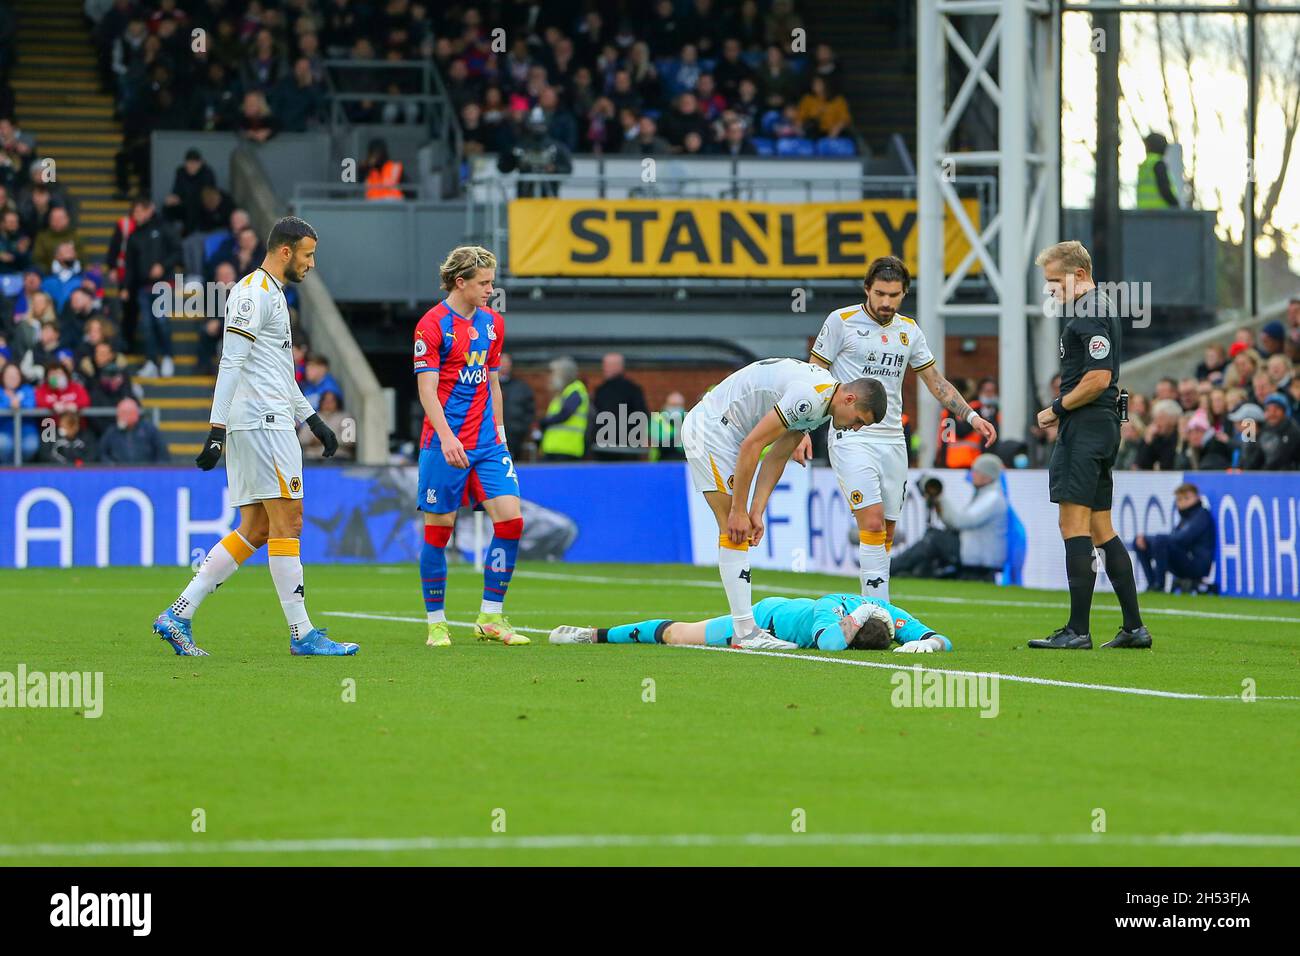 London, UK. 6th November 2021; Selhurst Park, Crystal Palace, London,  England; Premier League football, Crystal Palace versus Wolves: Jose Sa of  Wolverhampton Wanderers diving at the feet of Gallagher to save the